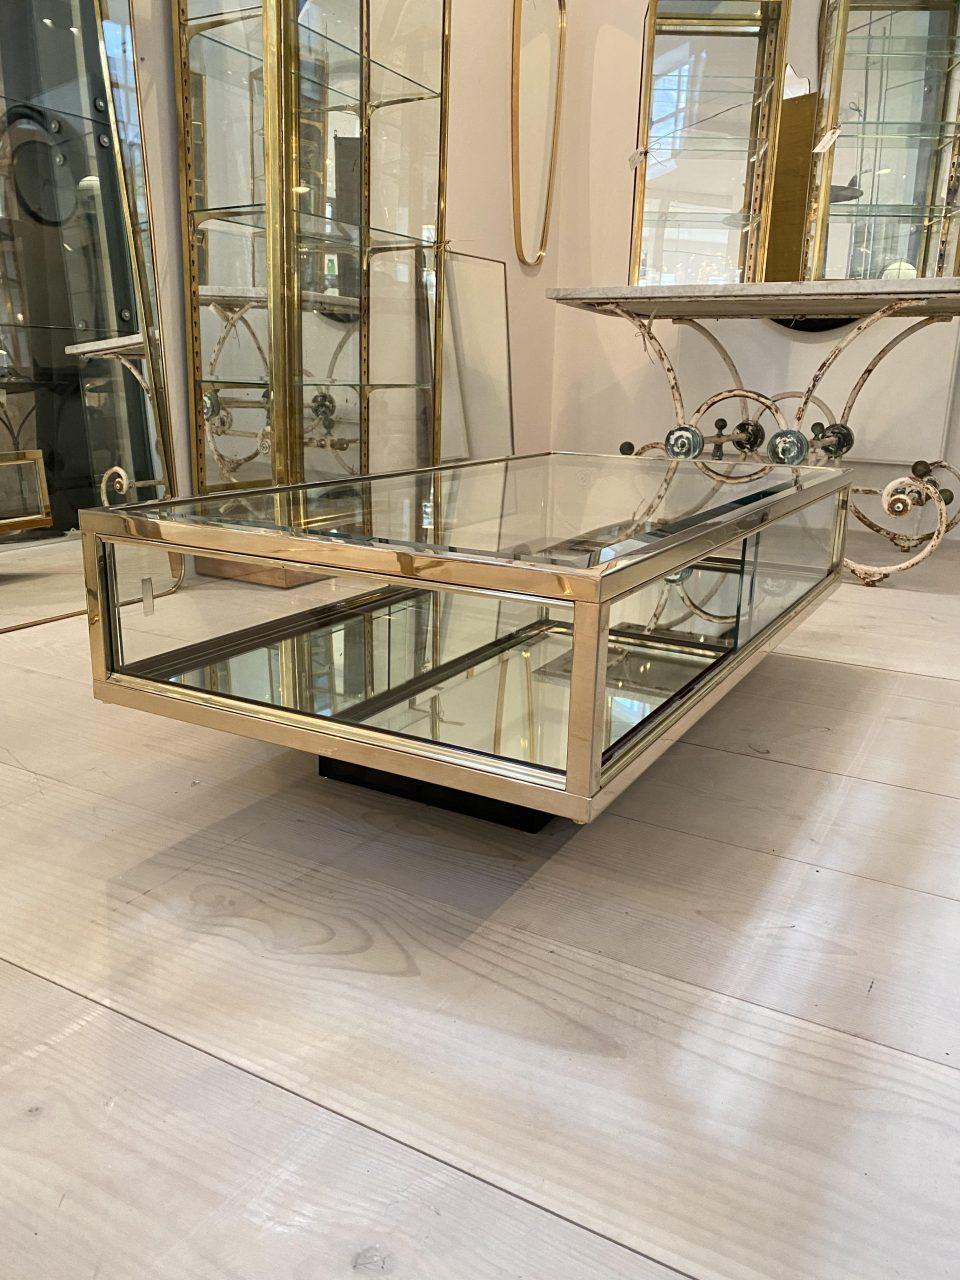 Elegant and stylish French coffee table / coffee table. Created the legendary interior house Maison Jansen circa 1970s. Beautifully made with glass and sleek and simple brass profiles, as well as a black-painted wooden base.

Maison Jansen was one